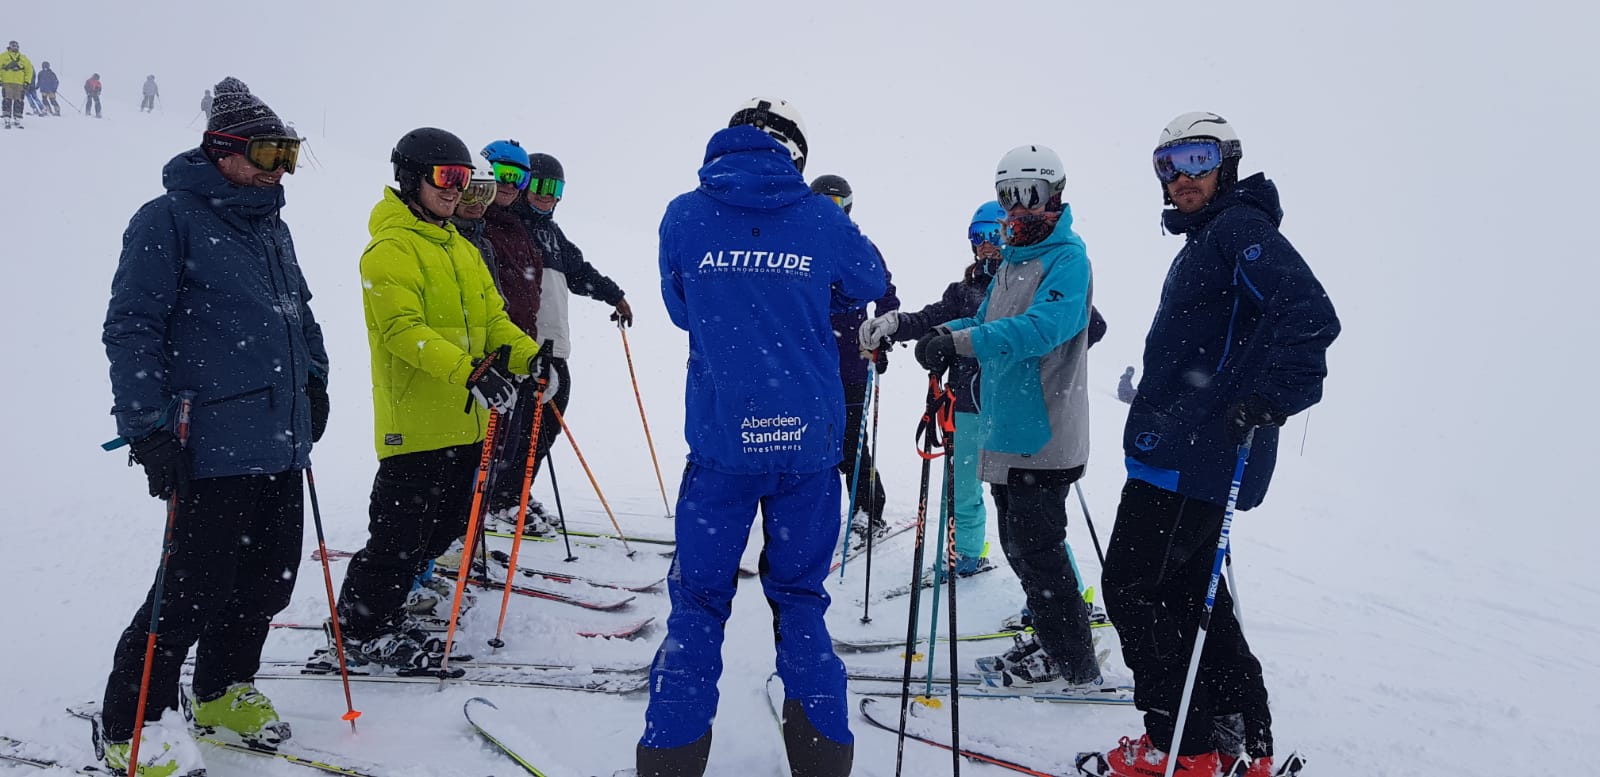 If you’ve never been skiing before, the options of the different base layers, mid-layers and exterior layers can seem like a bit of an enigma..